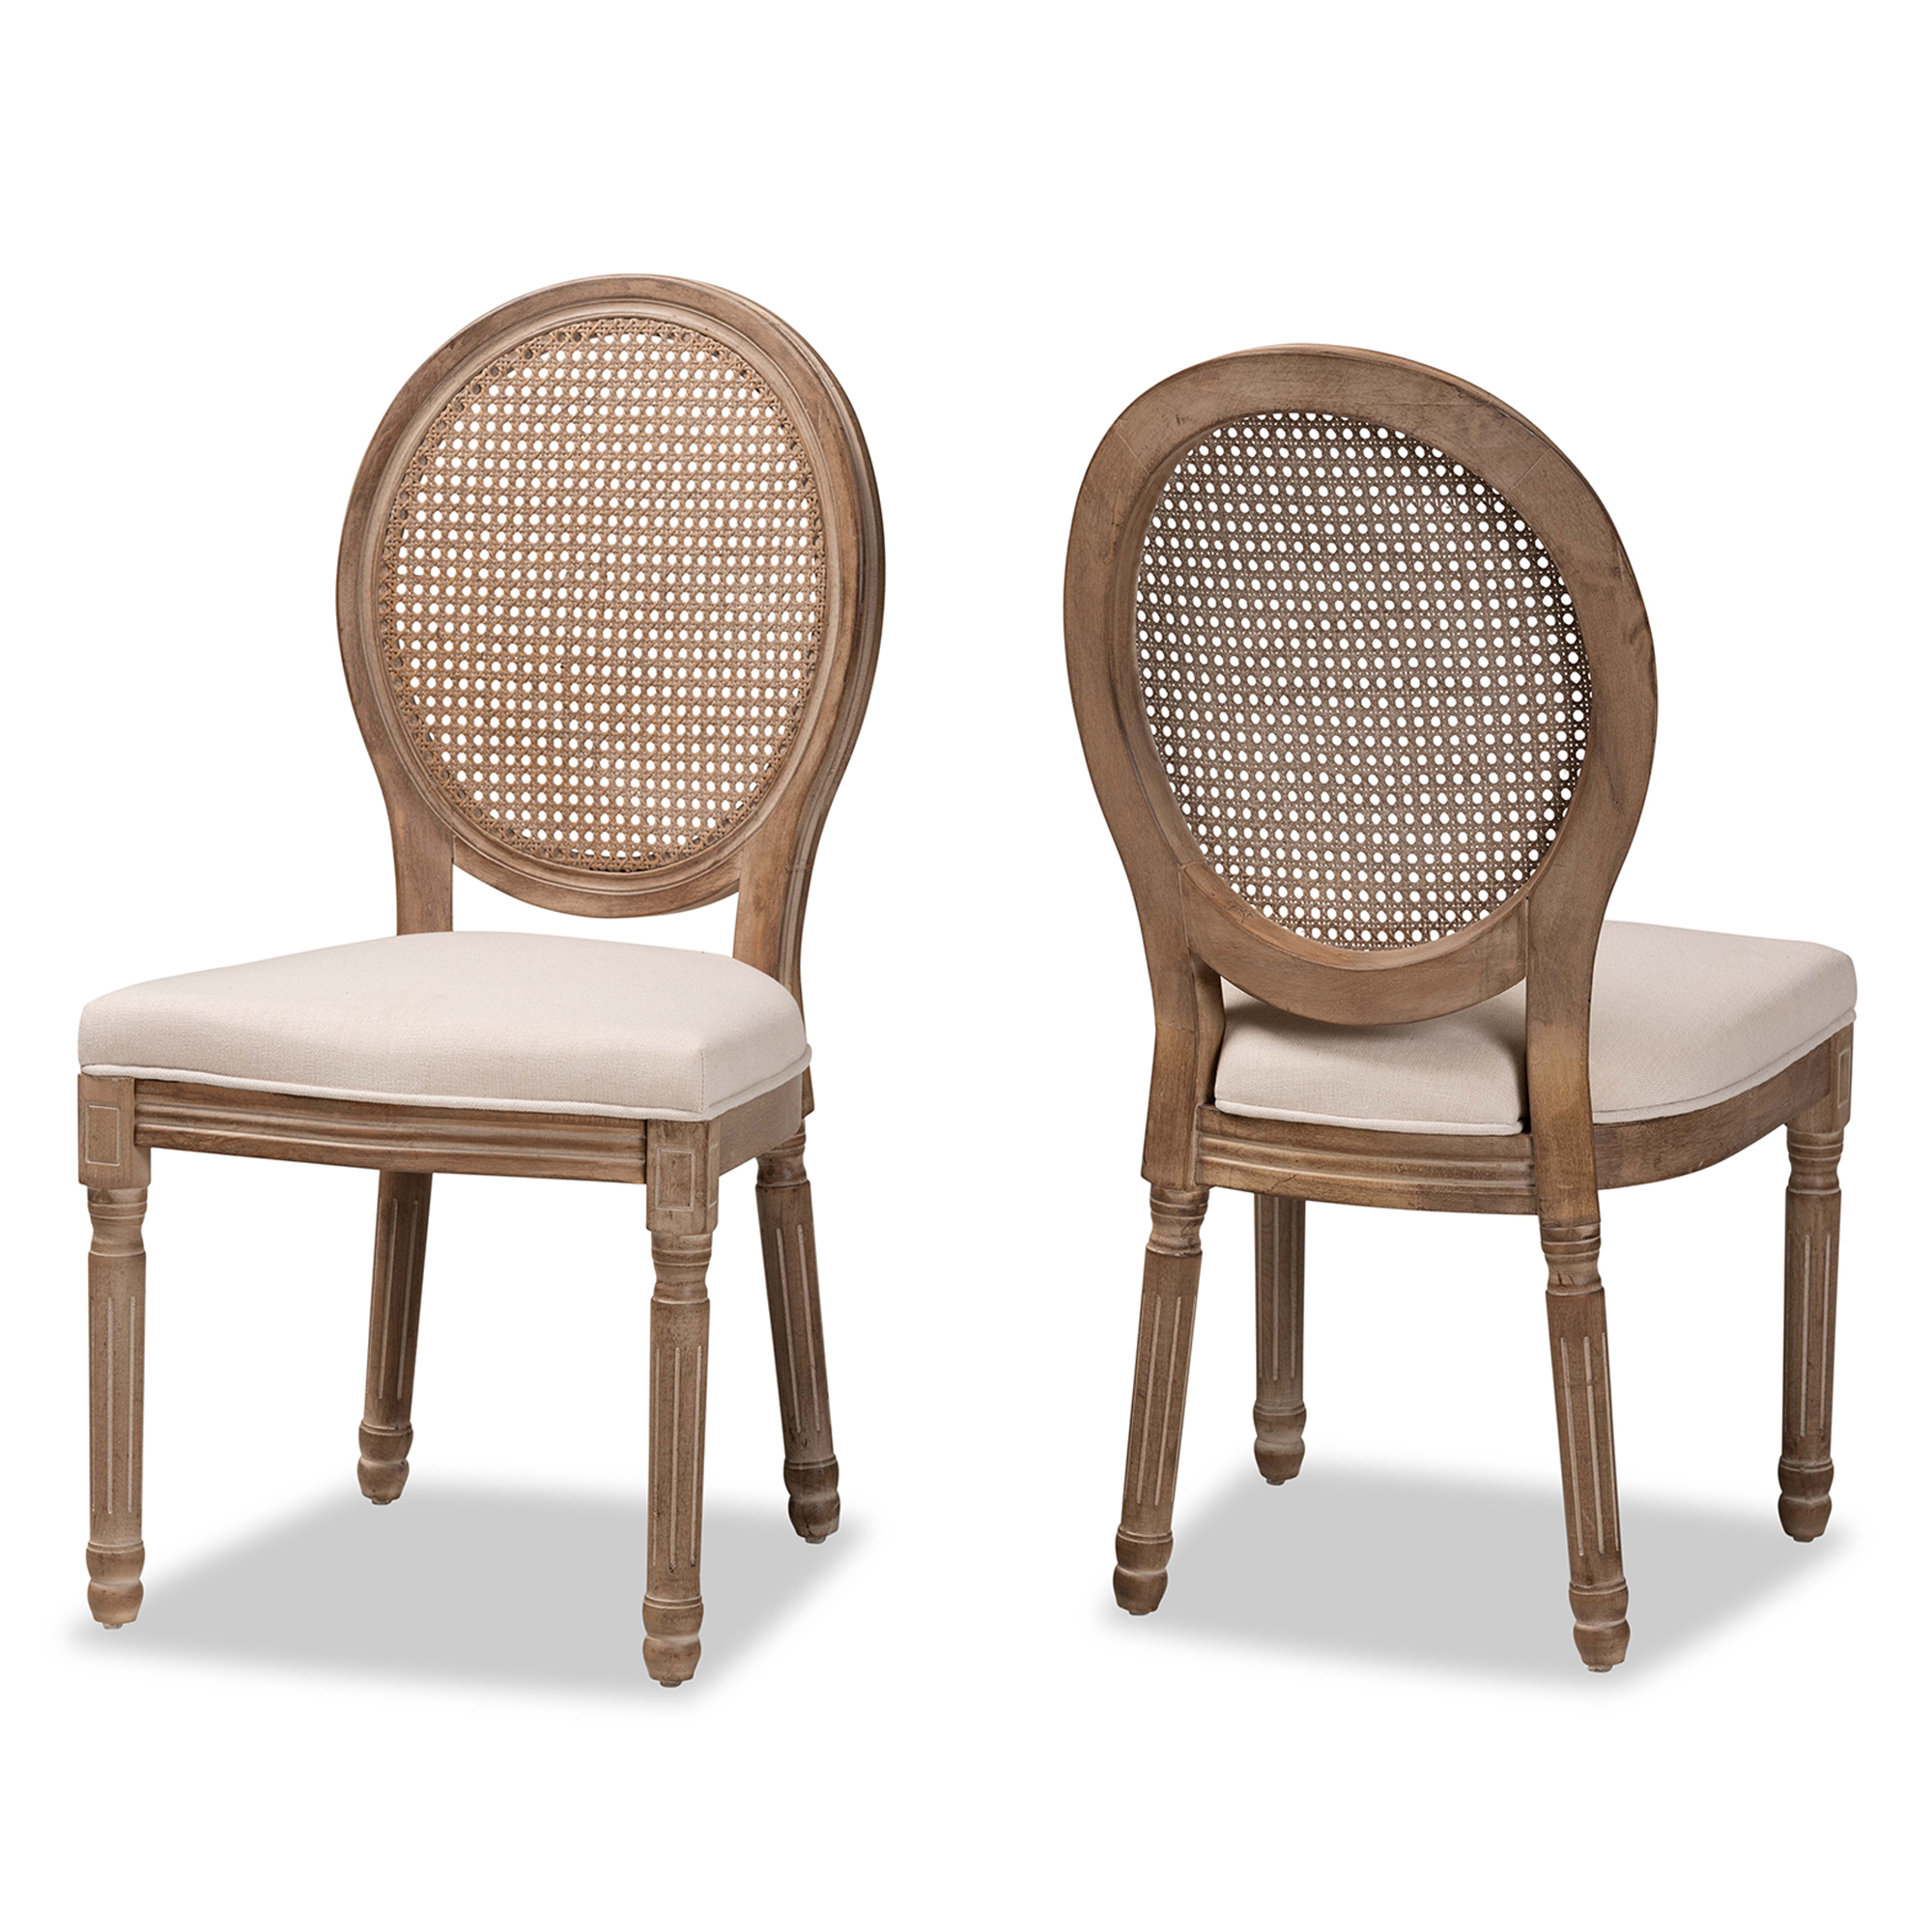 Baxton Studio Louis Traditional French Inspired Beige Fabric Upholstered and Antique Brown Finished Wood 2-Piece Dining Chair Set with Rattan Affordable modern furniture in Chicago, classic dining room furniture, modern dining chairs, cheap dining chairs